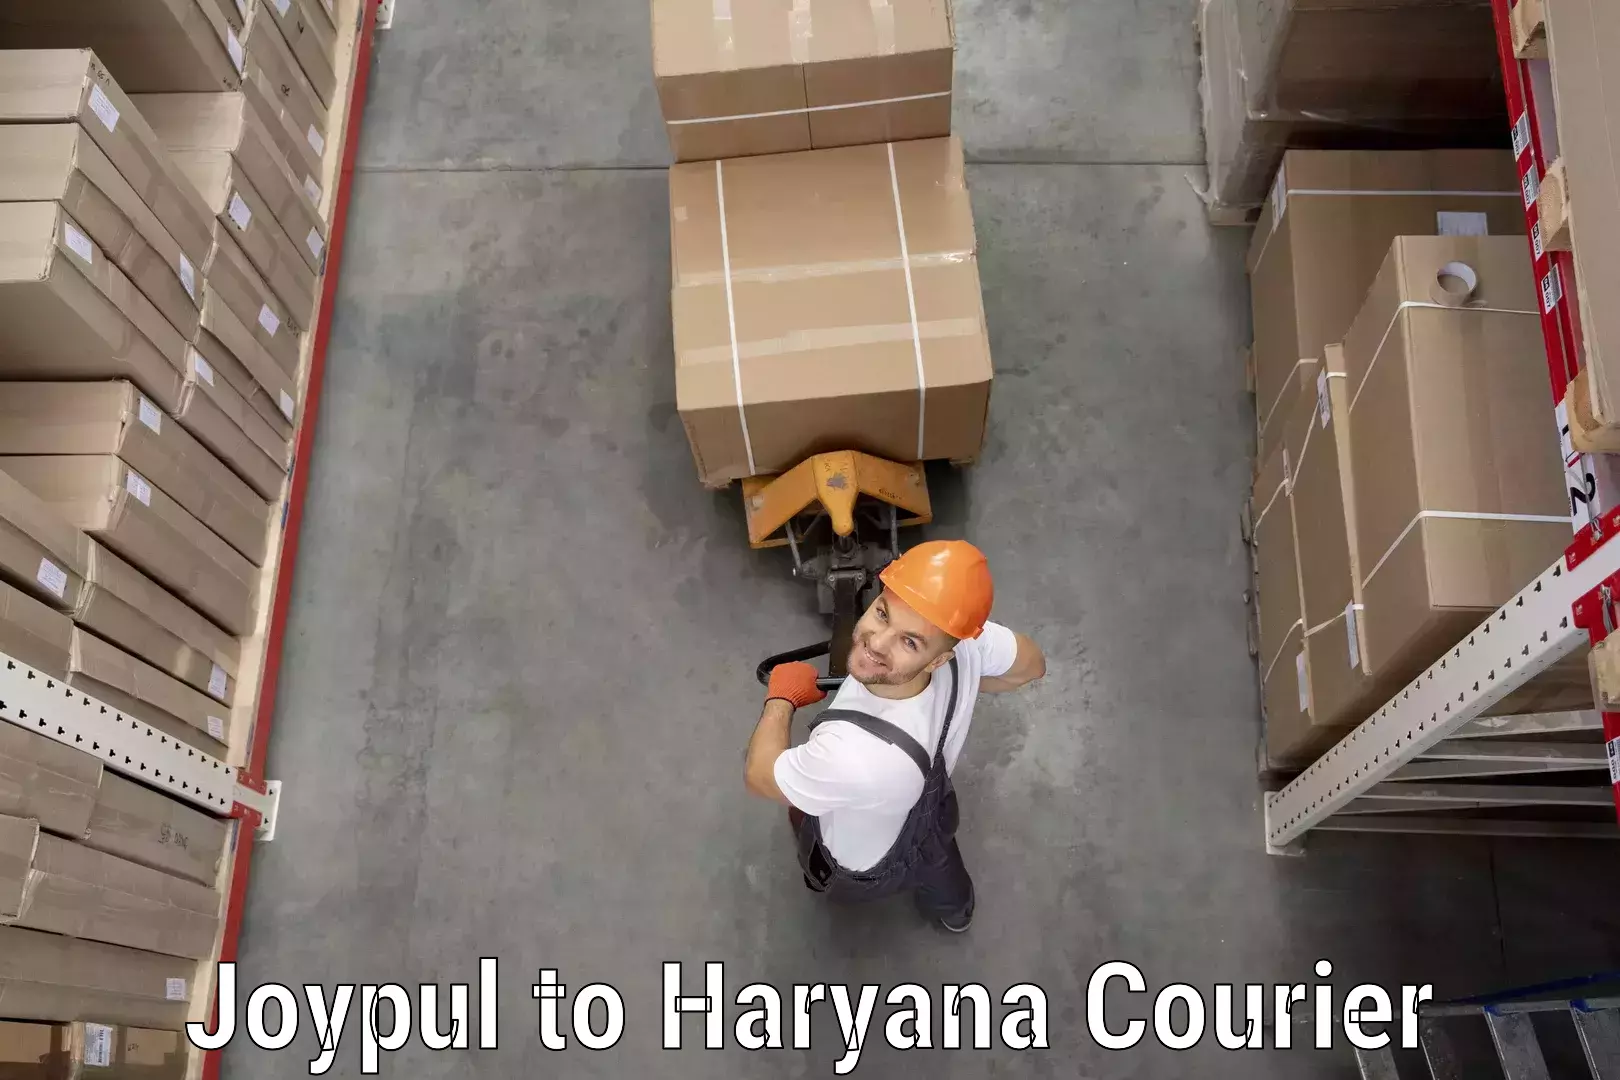 Same-day delivery options Joypul to Haryana